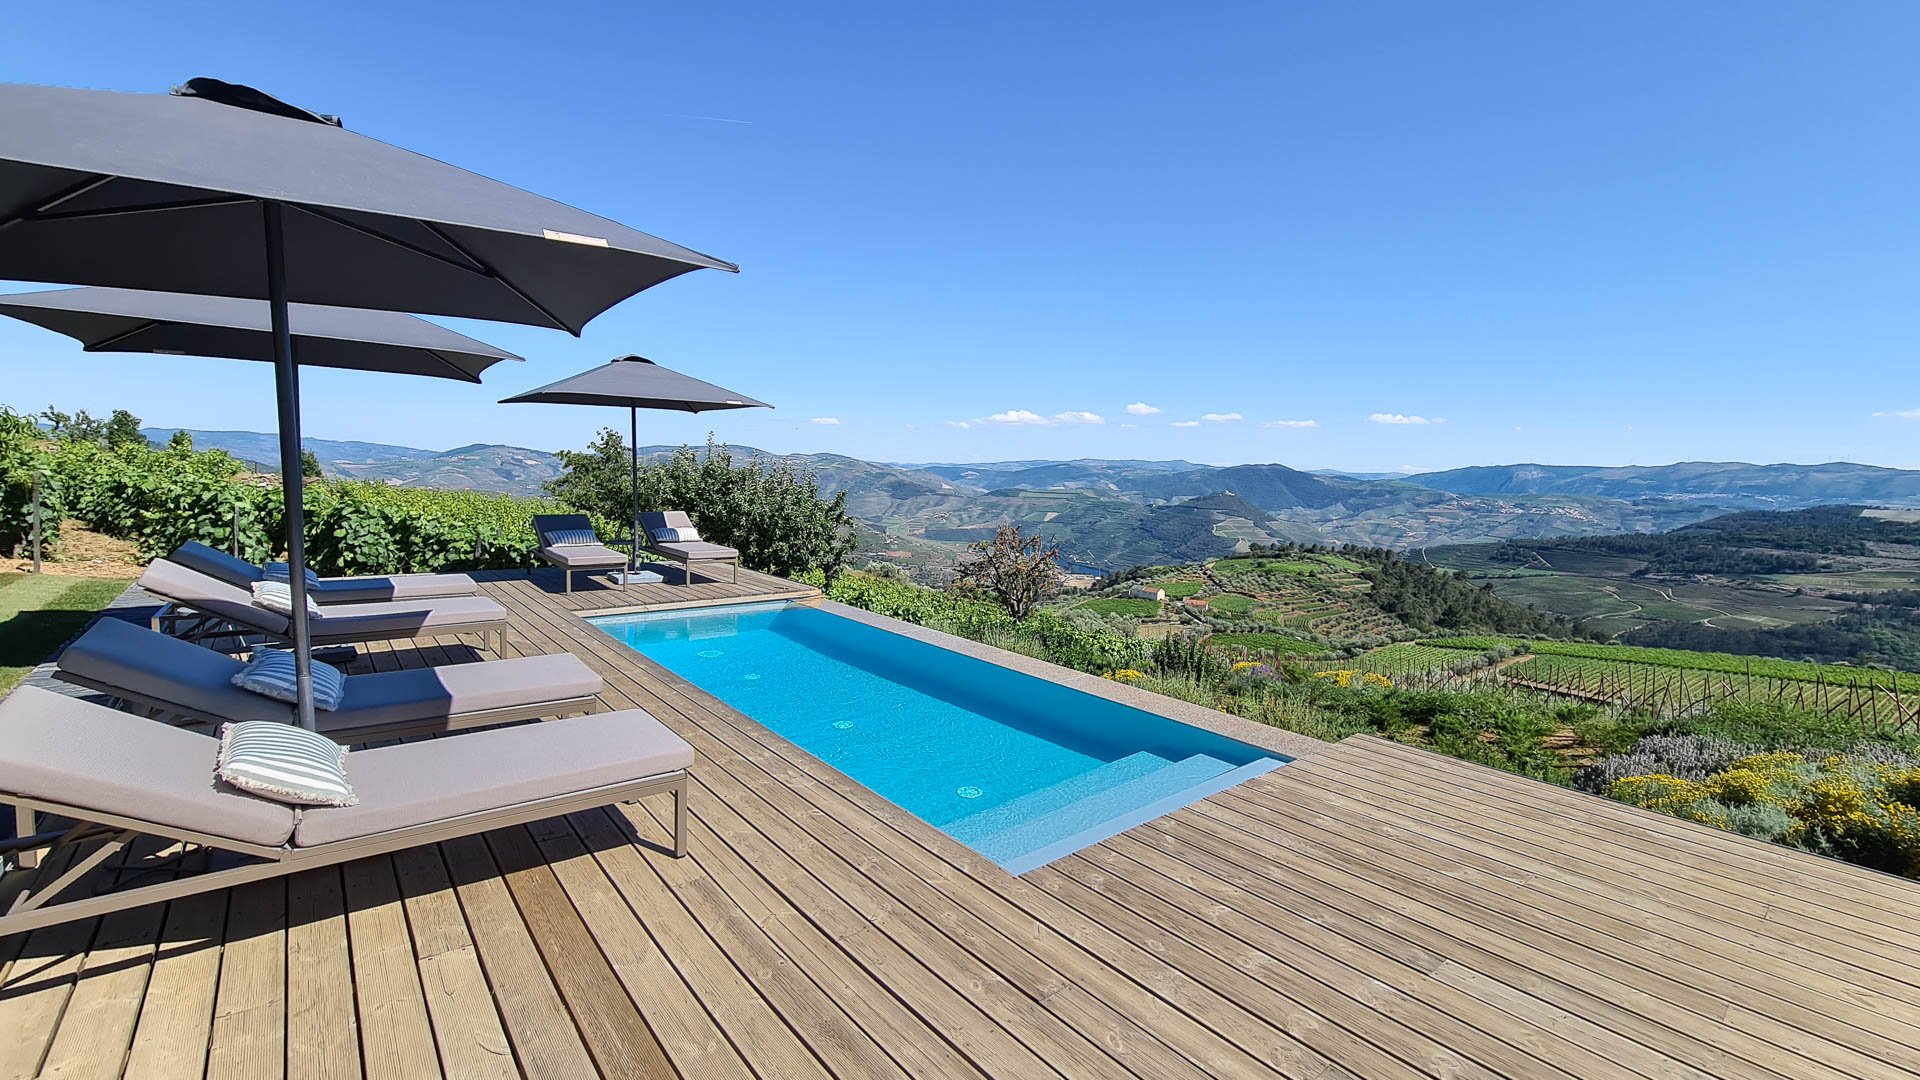 Property Image 1 - Douro Valley Rental Home with Sweeping Vistas and Pool